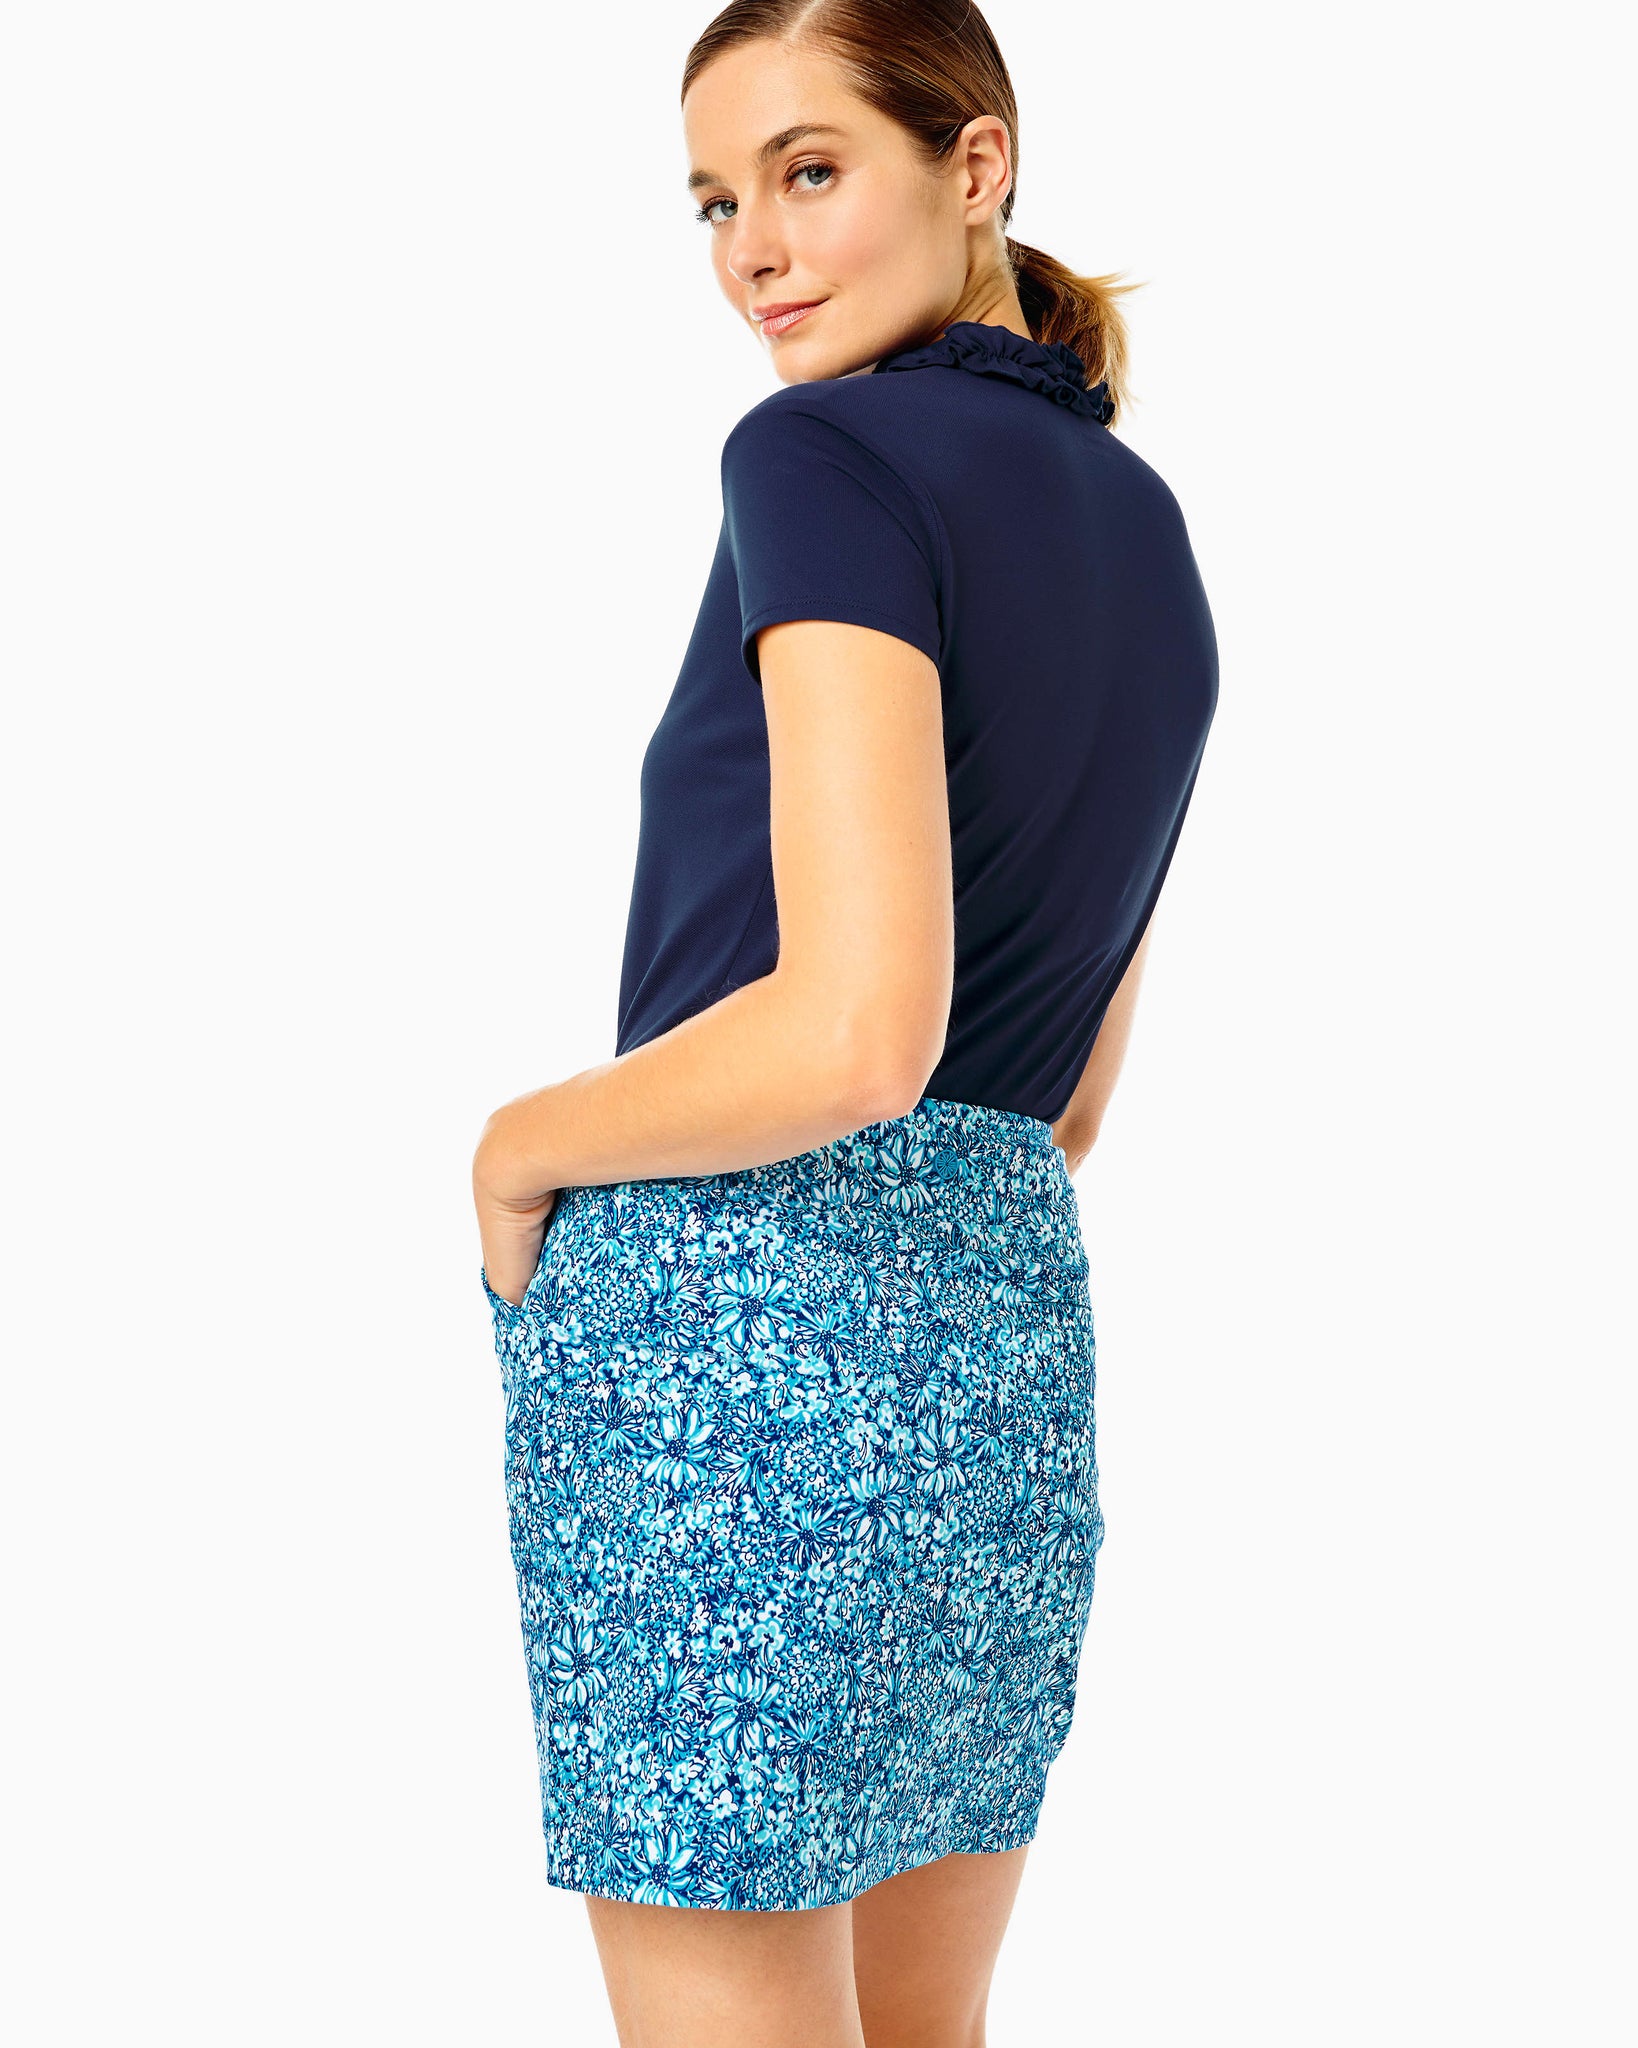 UPF 50+ Luxletic Monica Skort - Cumulus Blue Blooming Together Golf – The  Islands - A Lilly Pulitzer Signature Store